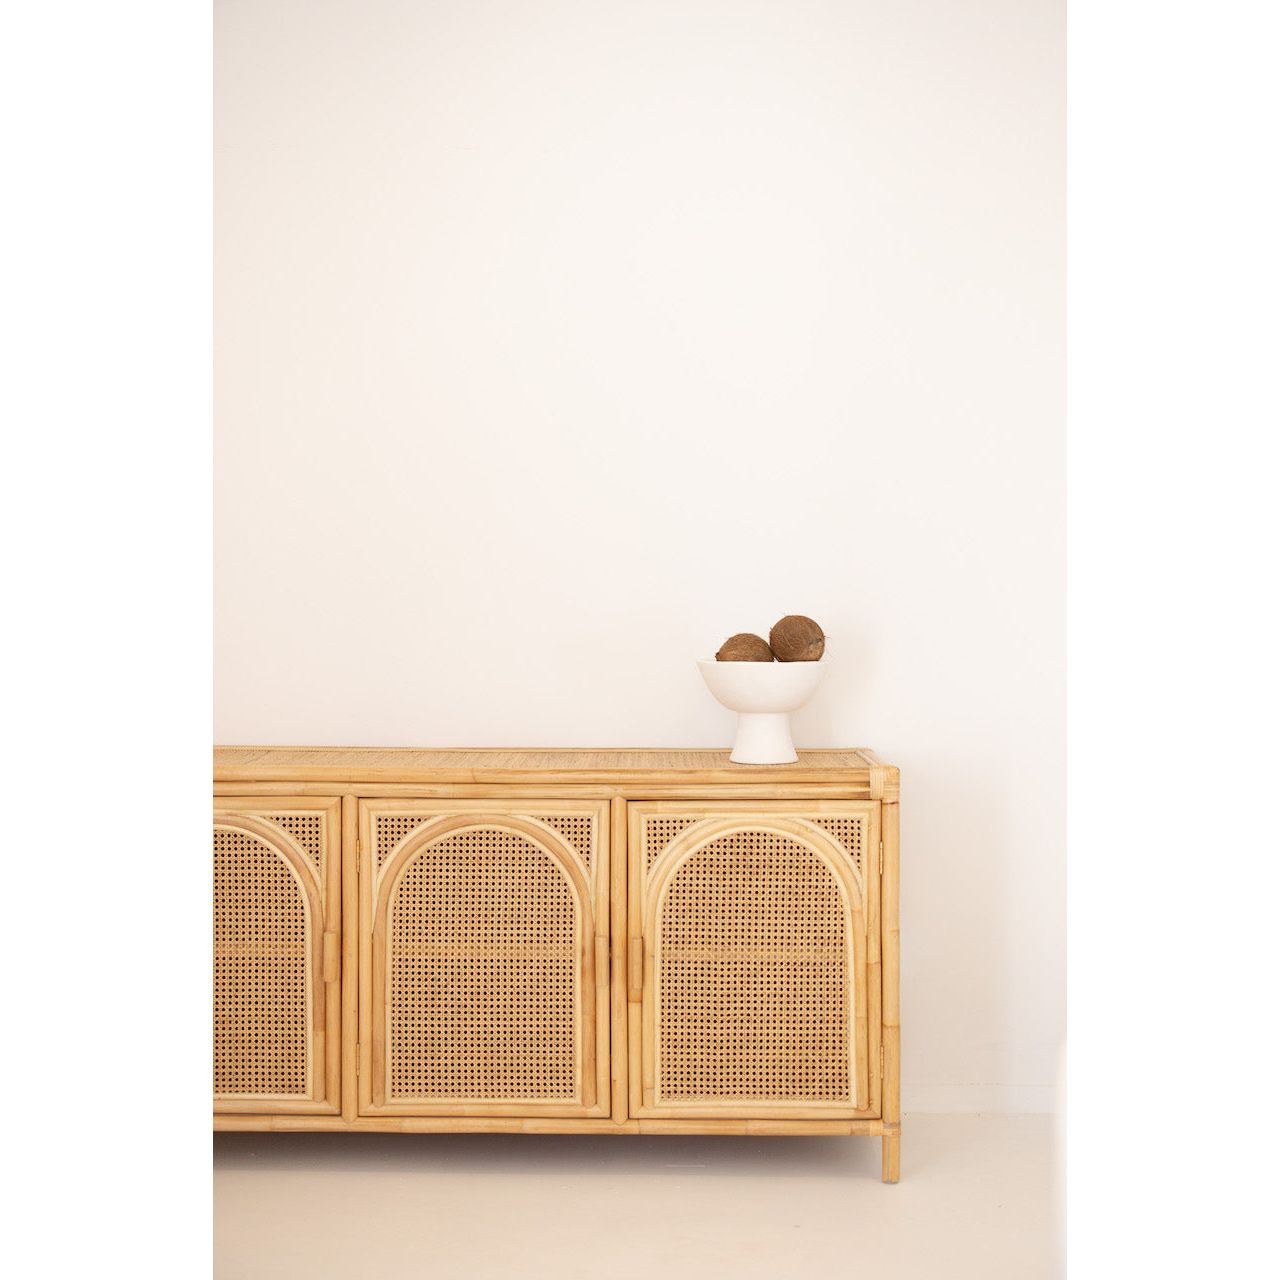 Archie Buffet / Sideboard